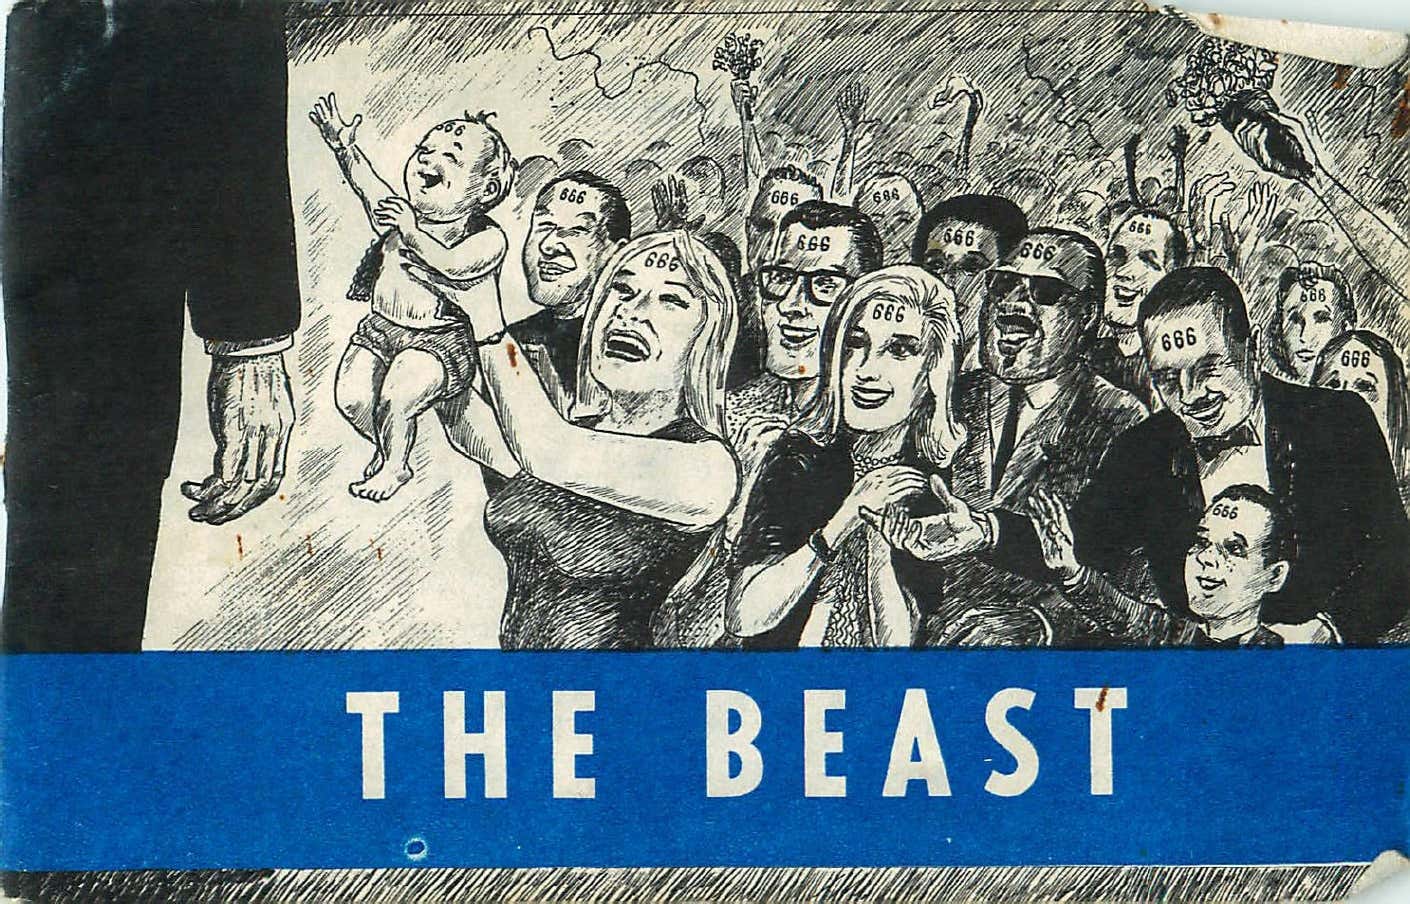 Cover art for the Jack Chick tract, "The Beast."